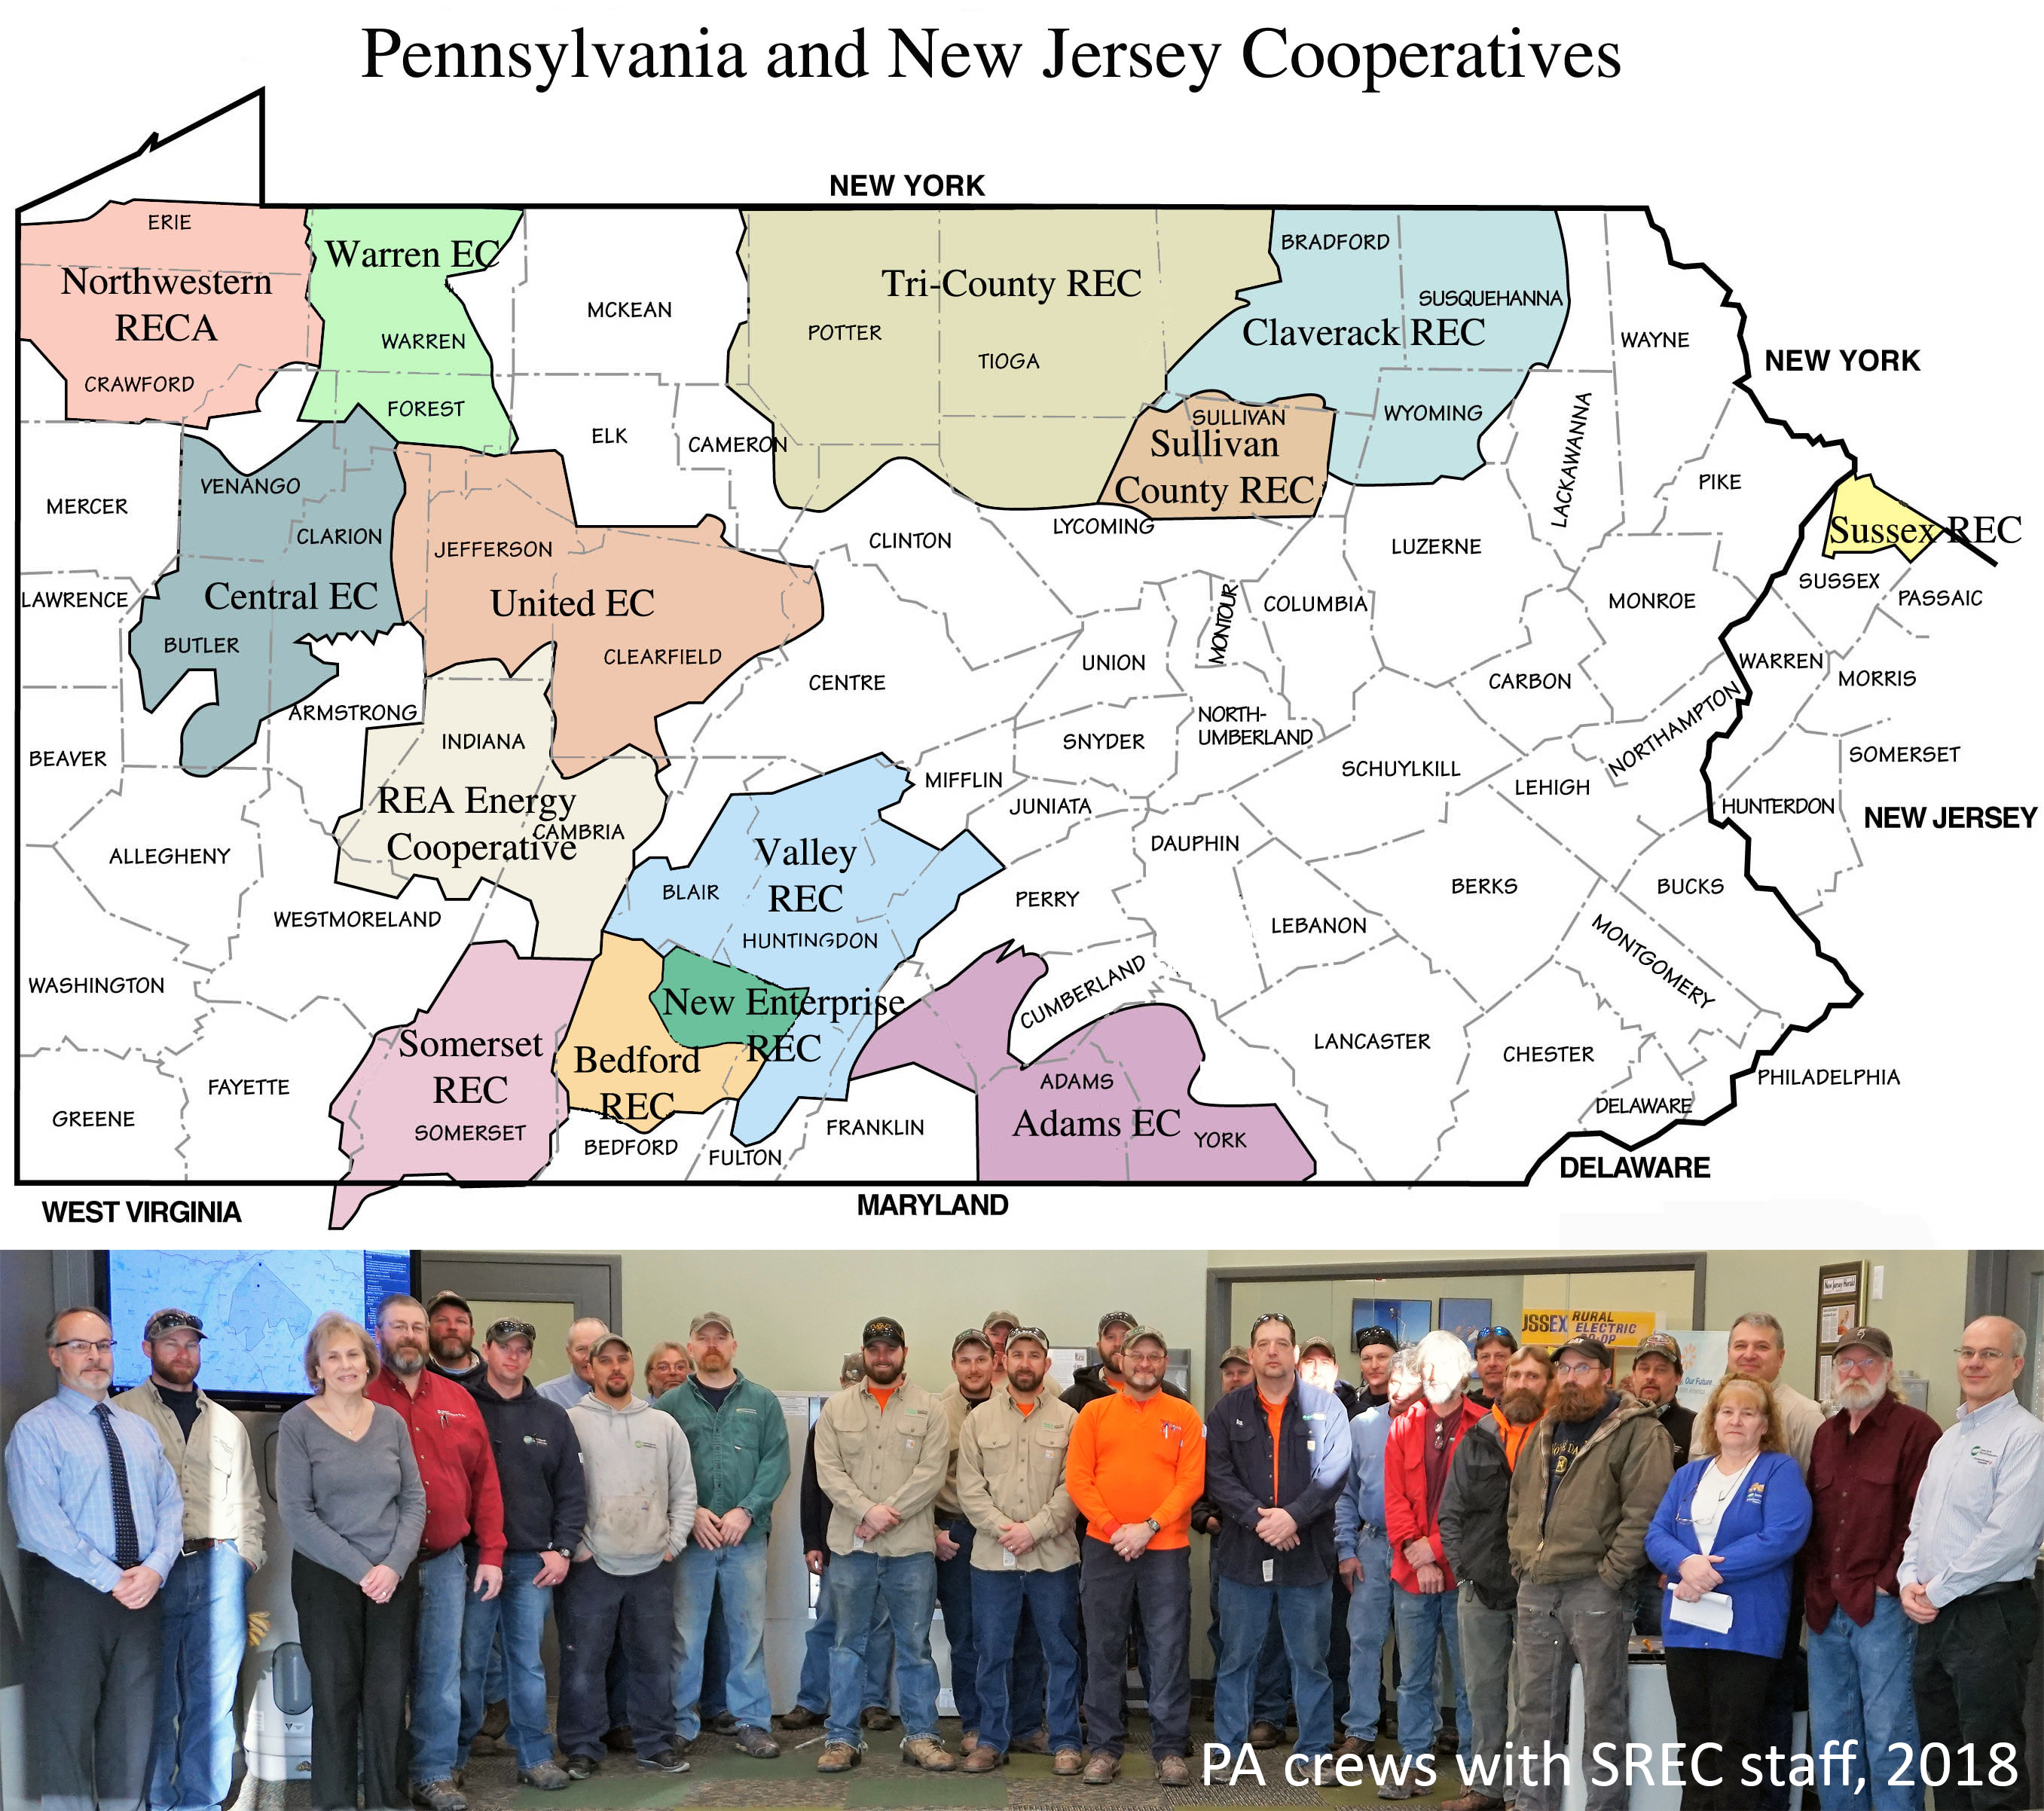 A map of Pennsylvania and northwestern New Jersey, labeled “Pennsylvania and New Jersey Cooperatives.” The map shows the service territory of SREC, and the 13 co-ops from PA. Beneath is a photo of crews from various PA co-ops in SREC’s lobby alongside SREC employees following storm restoration work in 2018. PREA co-ops frequently offer mutual aid during large storms to help safely and efficiently re-energize members.